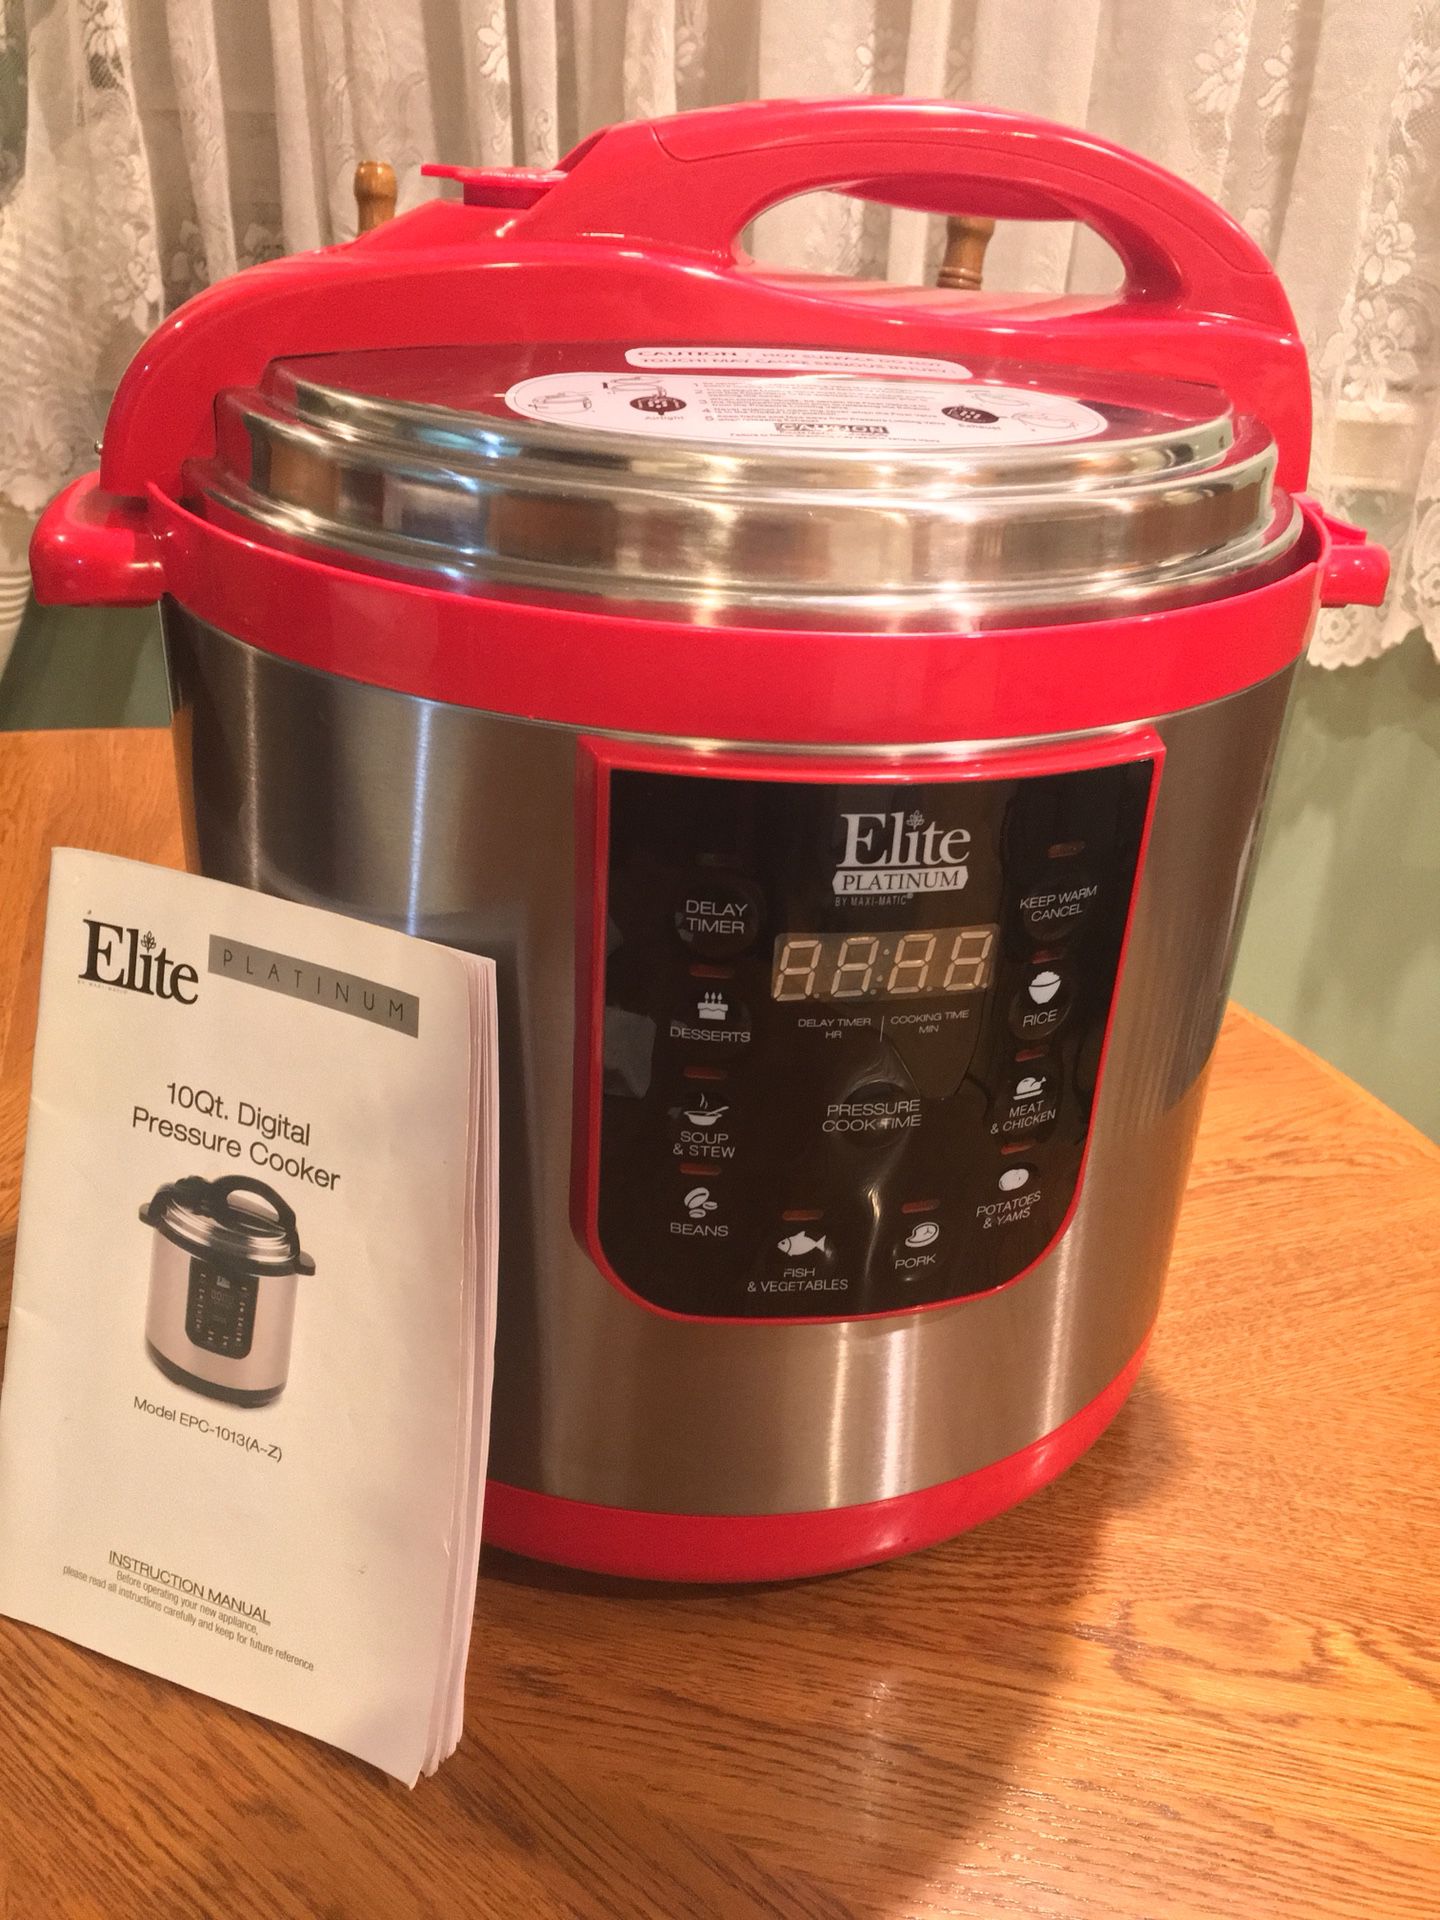 10 qt electric pressure cooker from